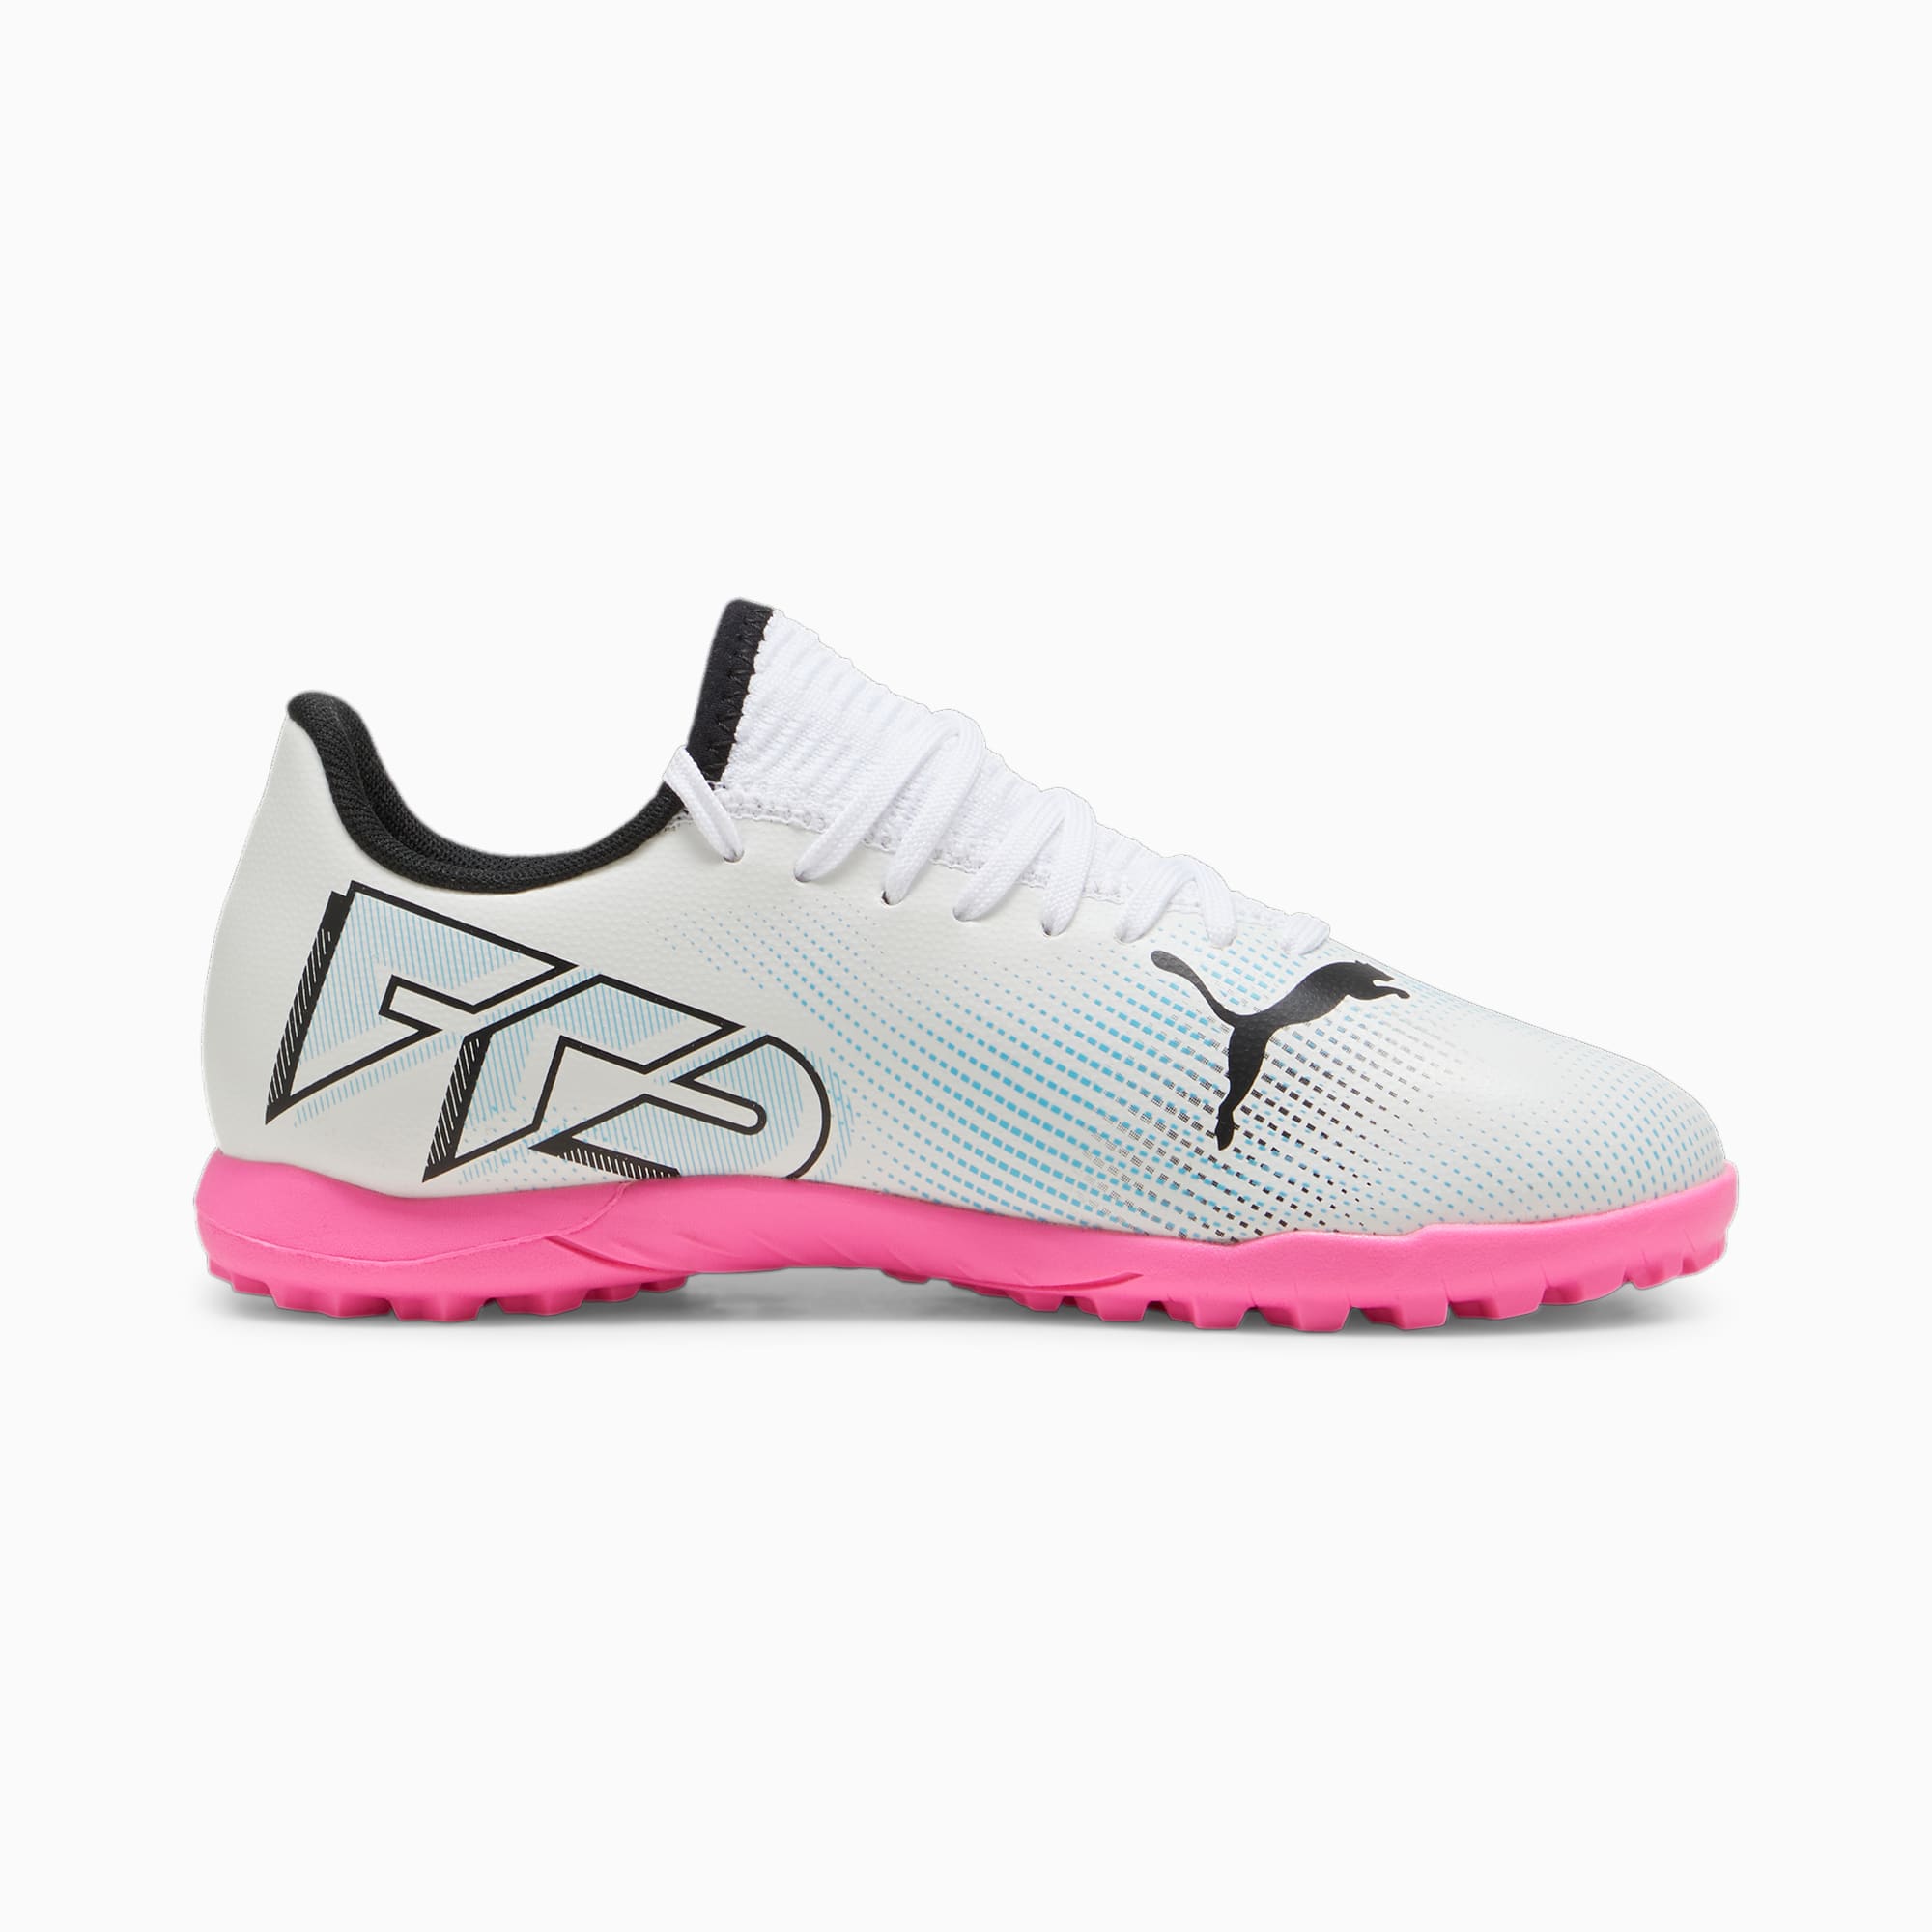 PUMA Future 7 Play TT Youth Football Boots, White/Black/Poison Pink